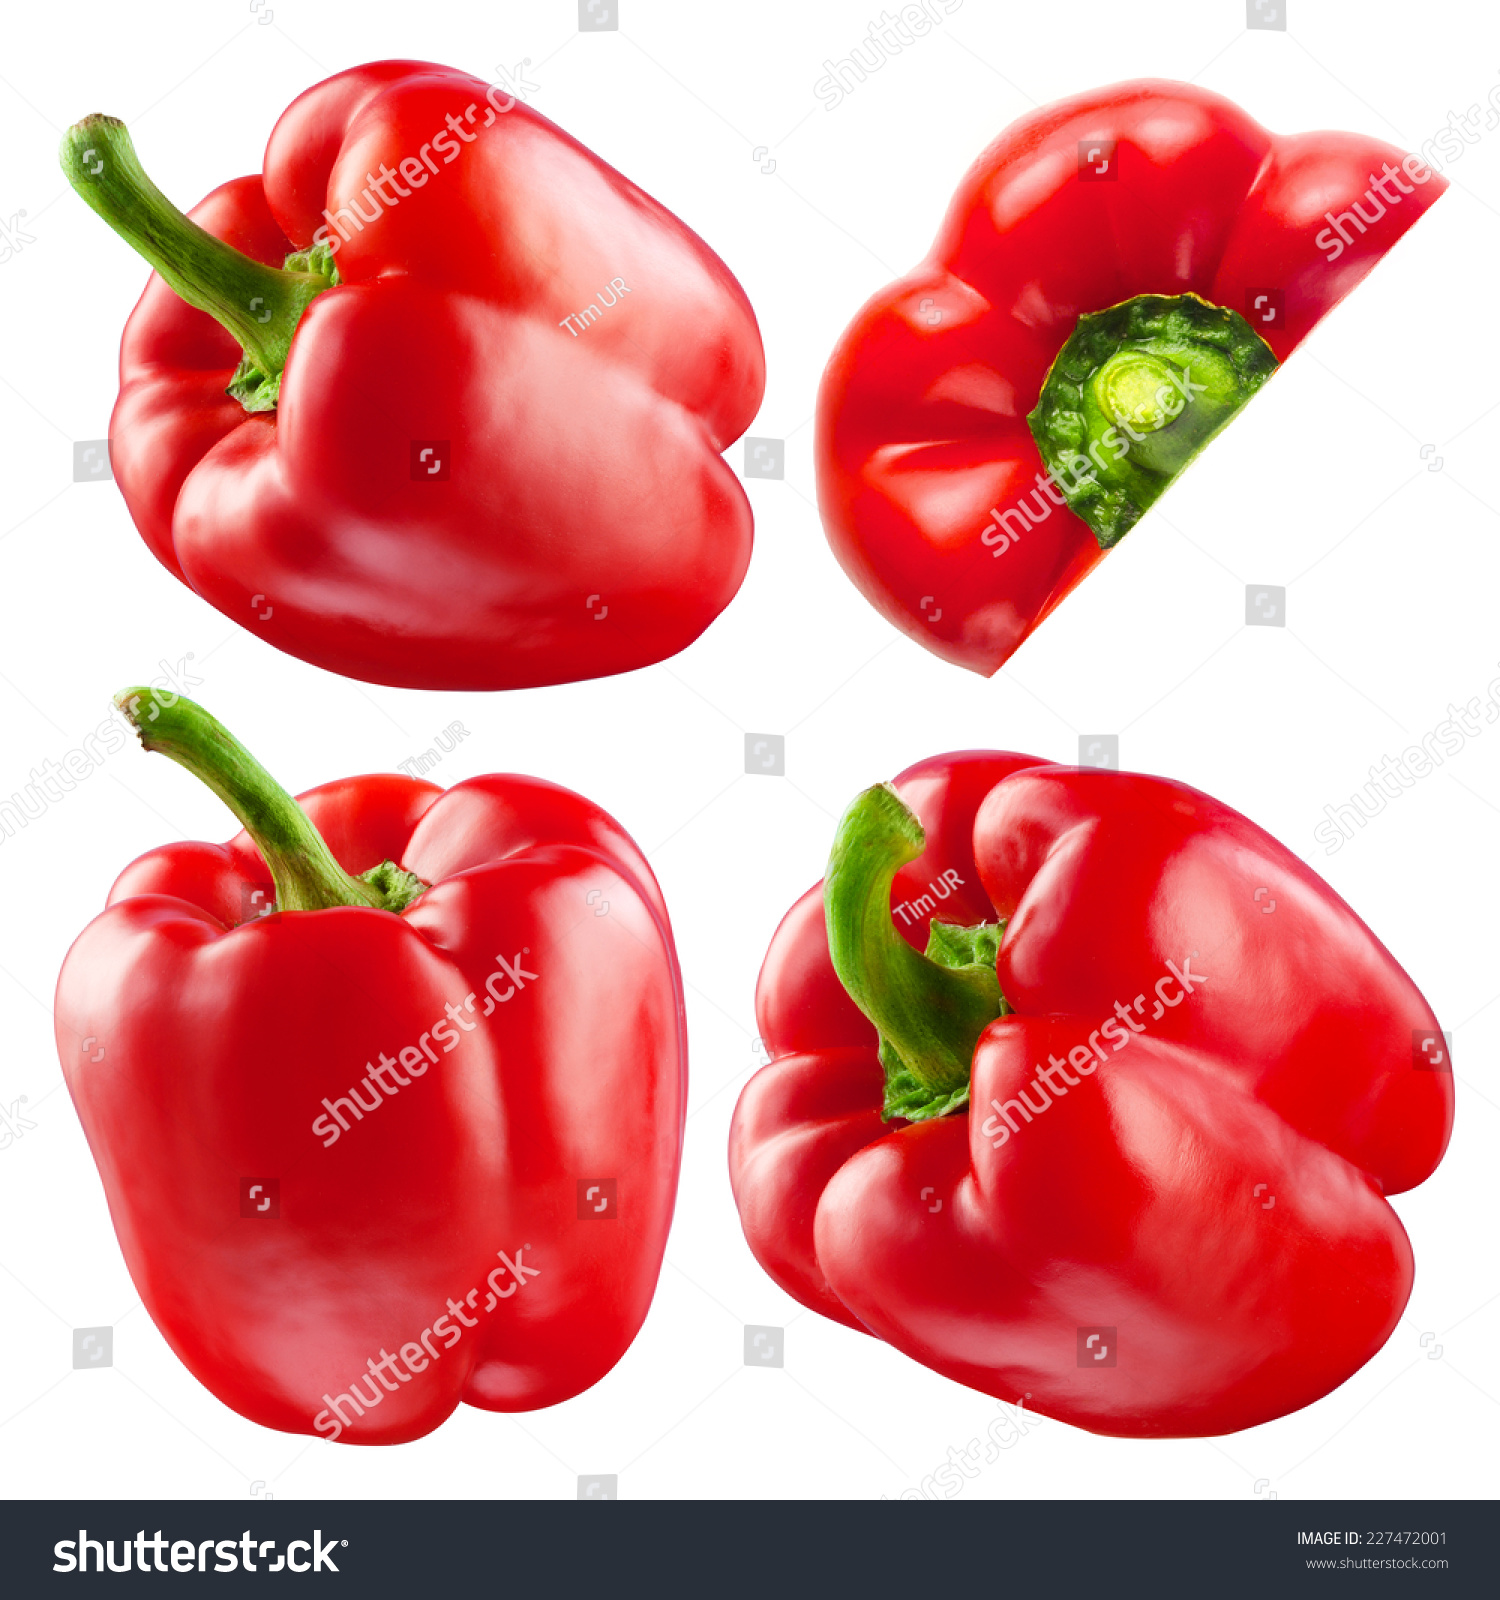 Red Pepper Fresh Paprika Isolated On Stock Photo 227472001 ...